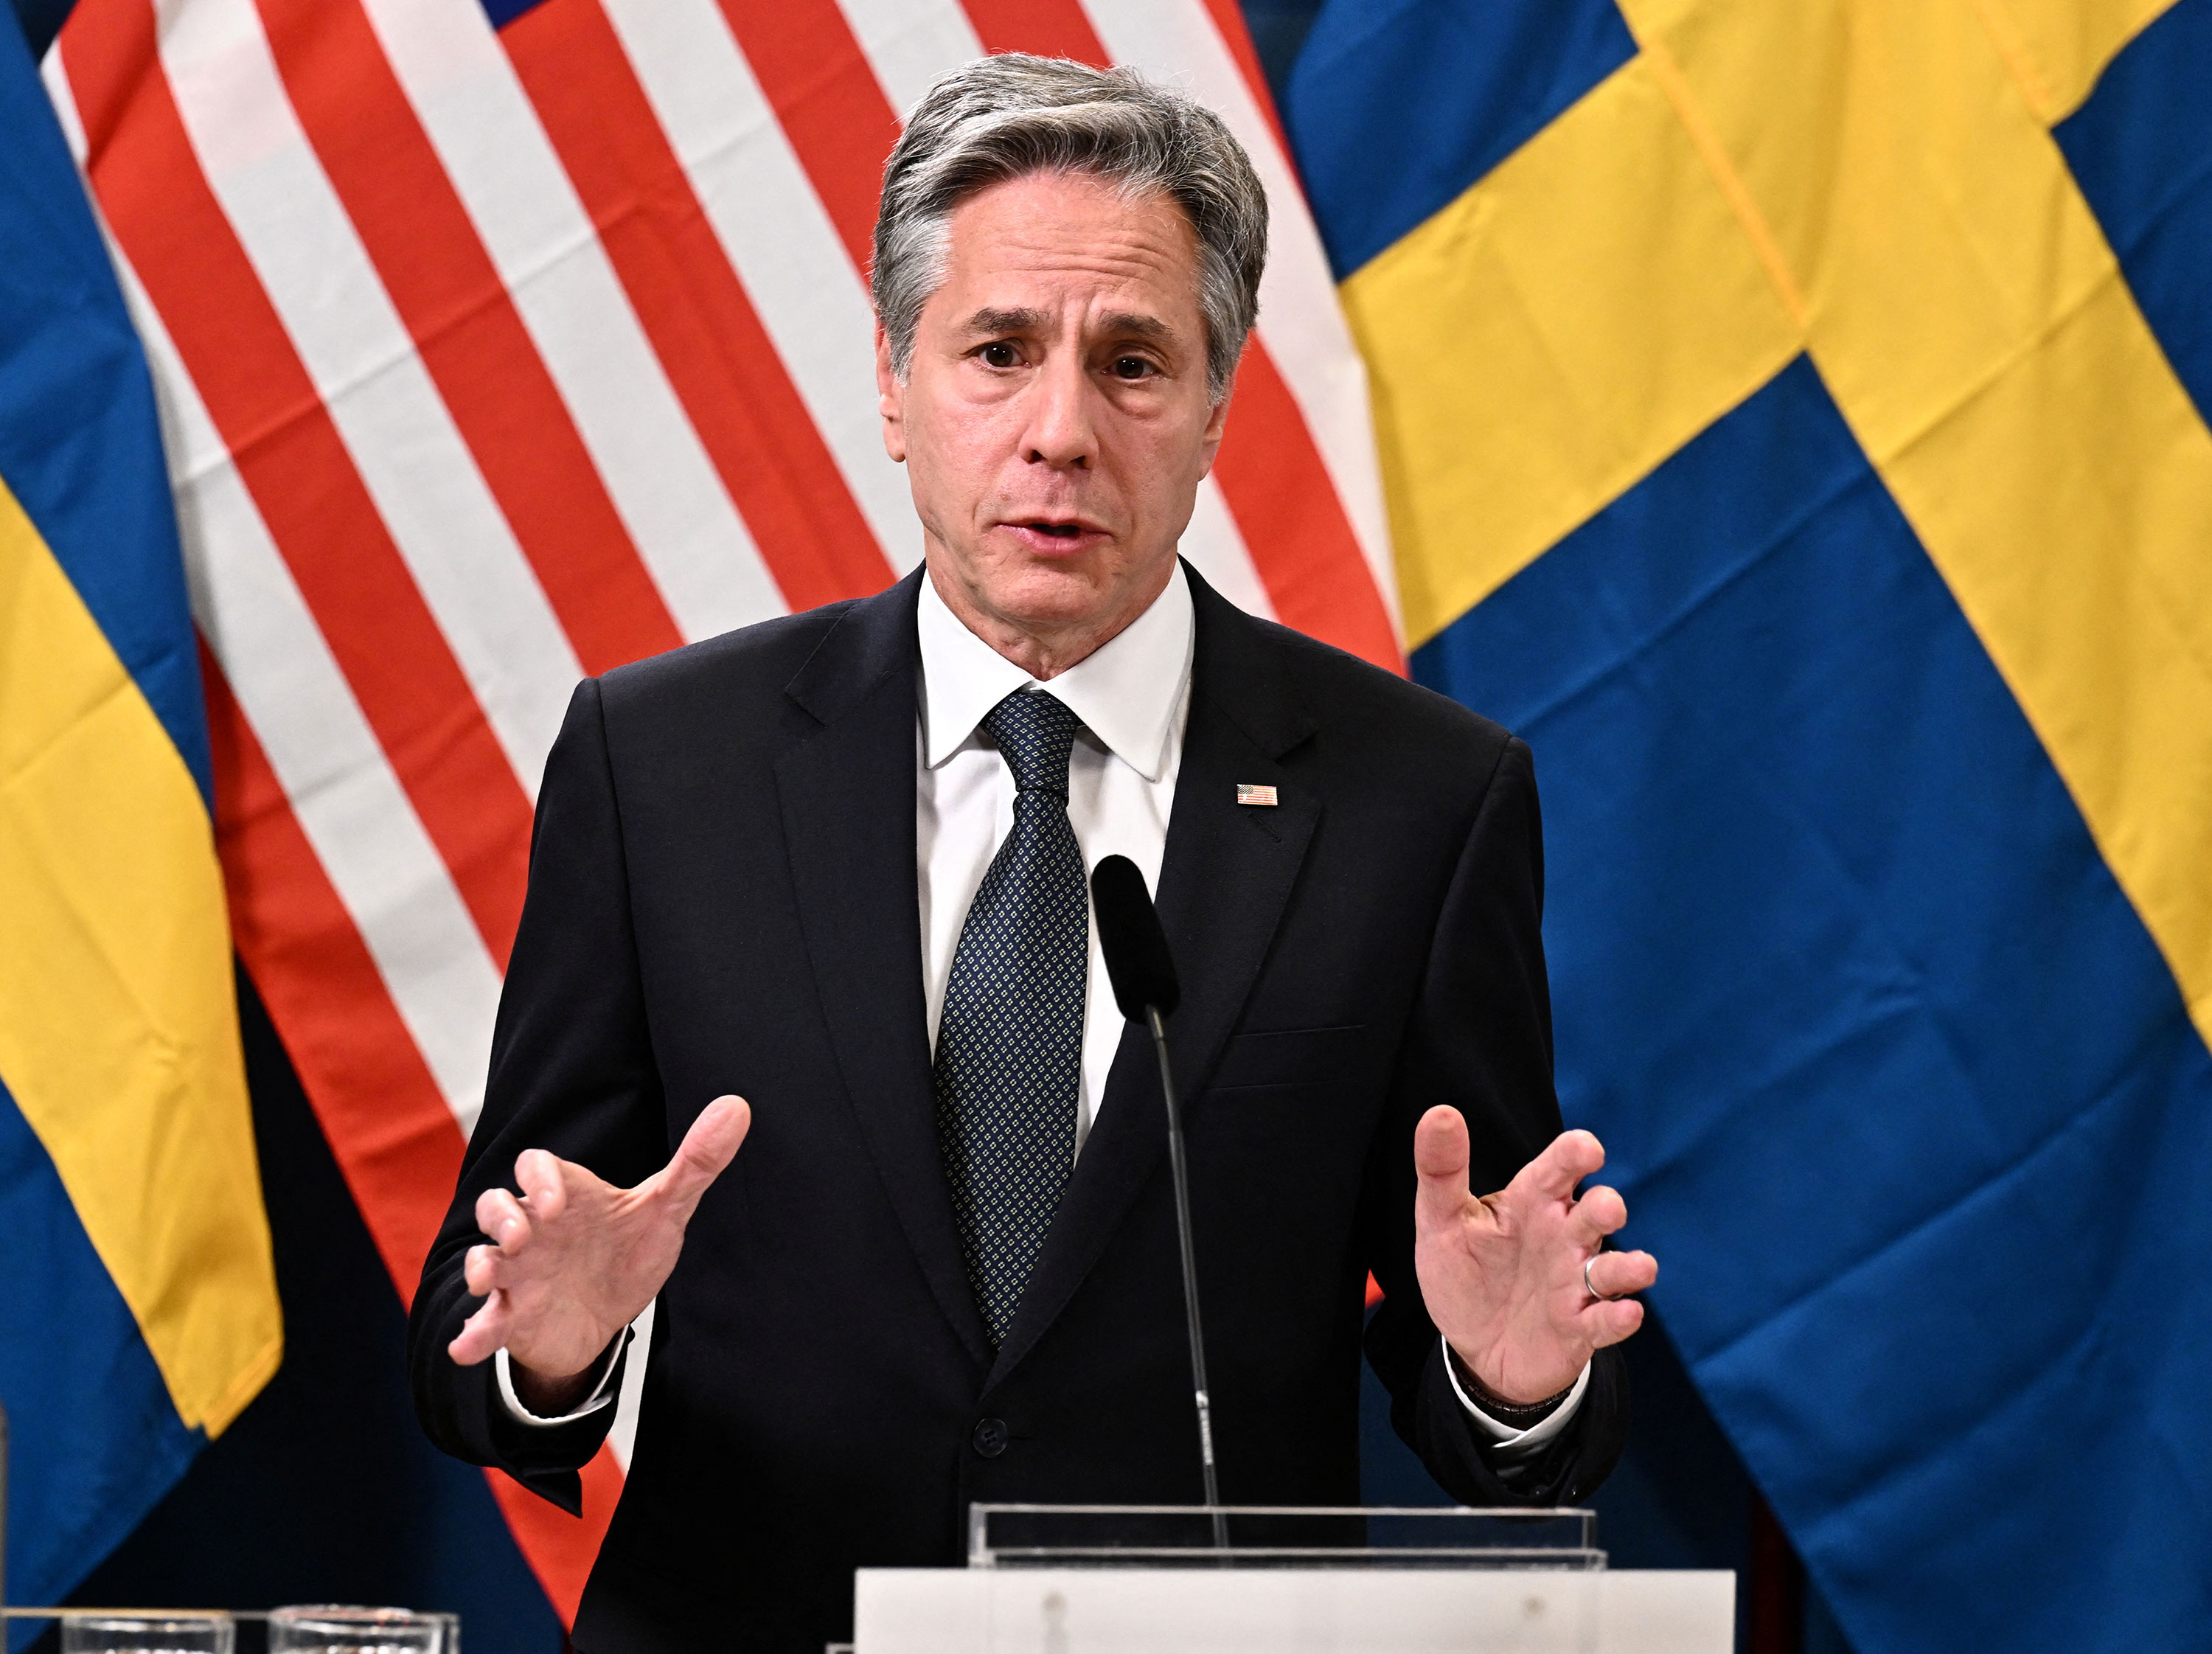 Secretary of State Antony Blinken speaks during a press conference with Sweden's Prime Minister Ulf Kristersson in Lulea, Sweden, on Tuesday.